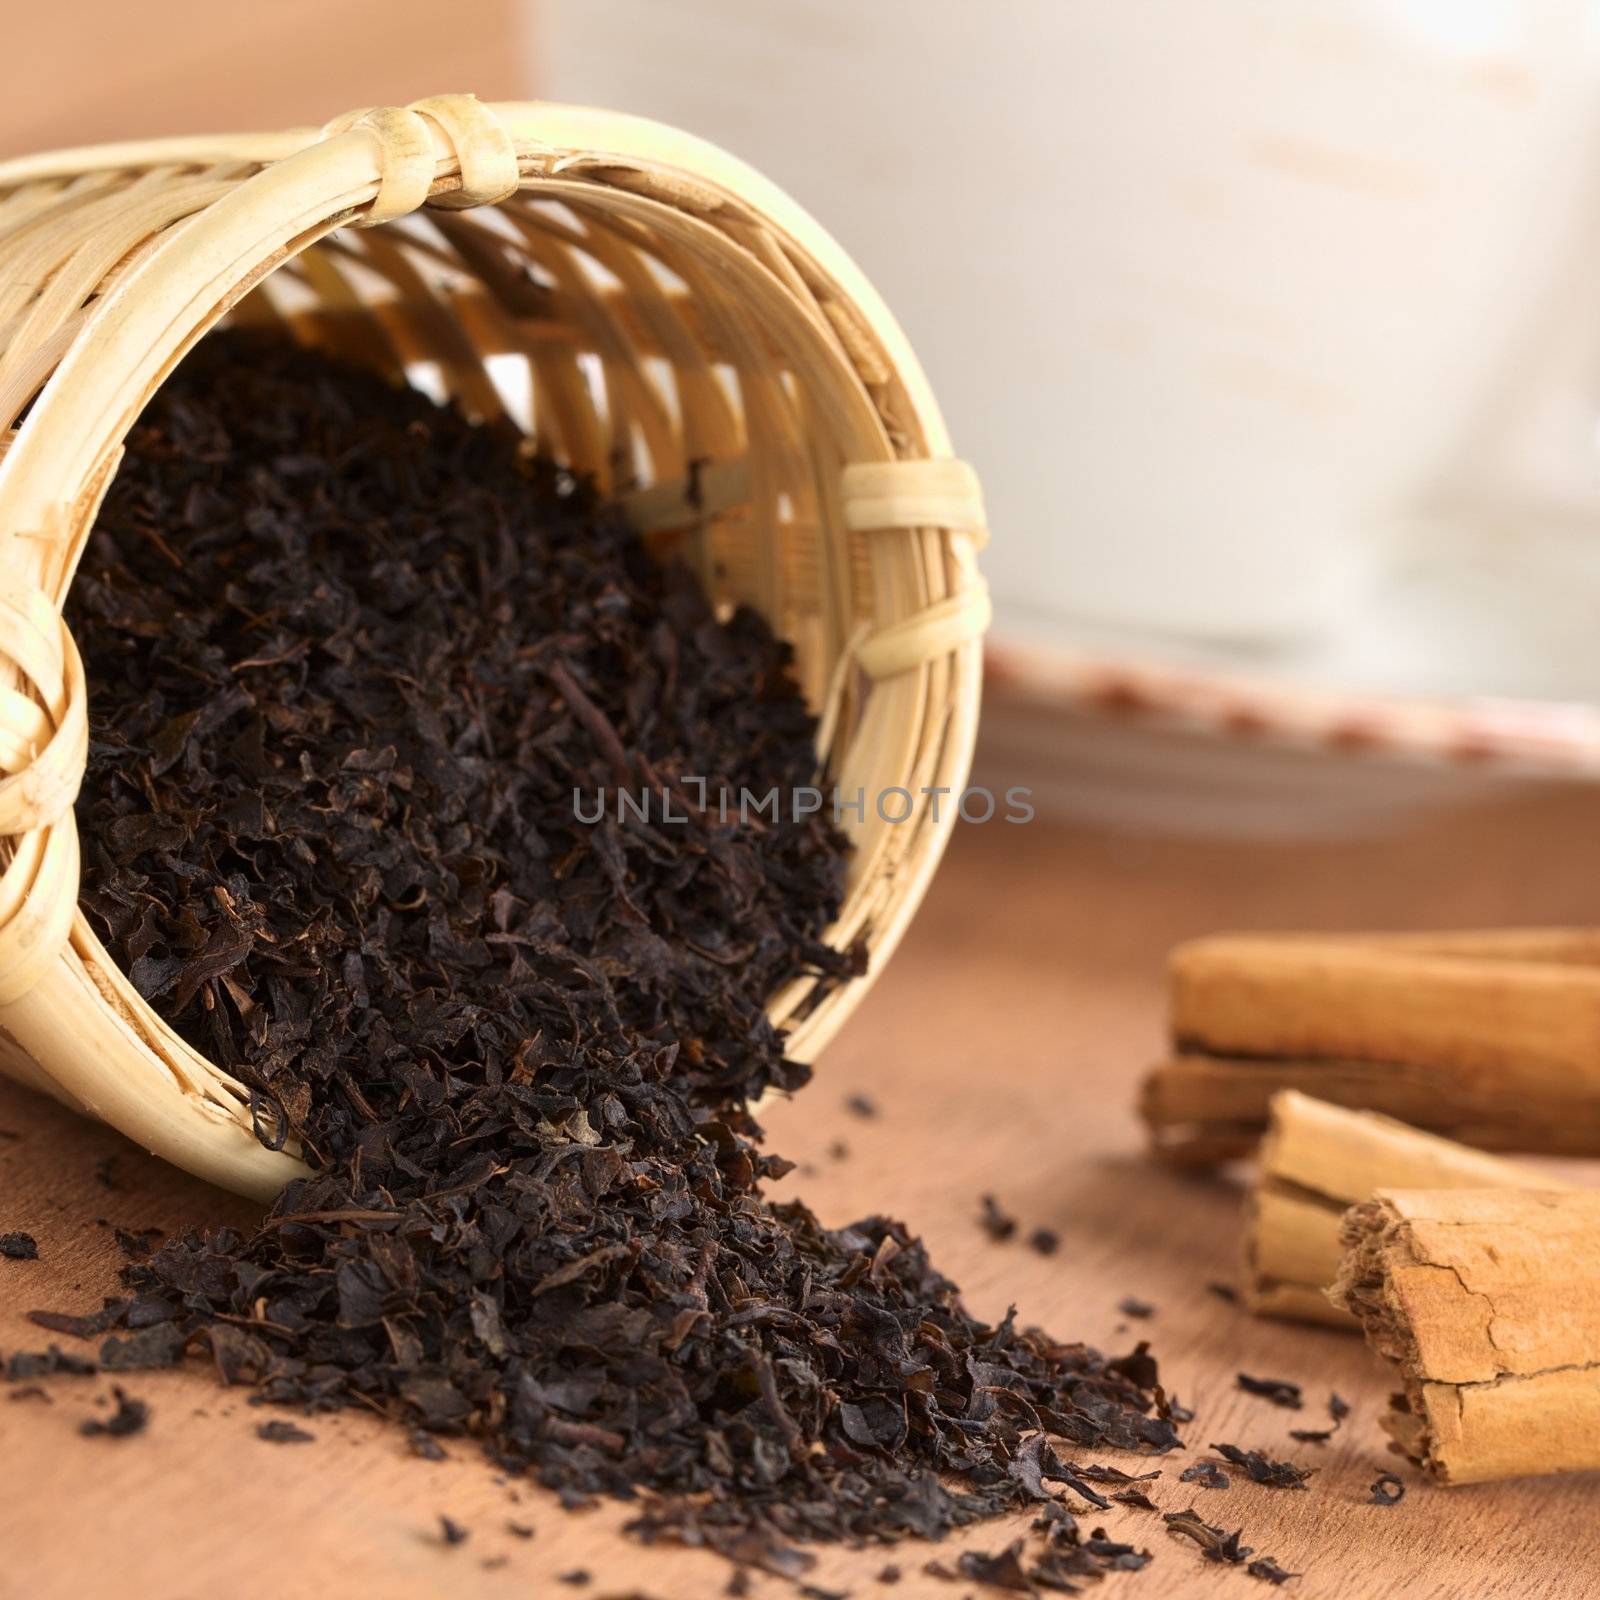 Loose black tea in wooden tea infuser with cinnamon sticks and tea cup (Selective Focus, Focus on the tea leaves at the rim of the infuser) 